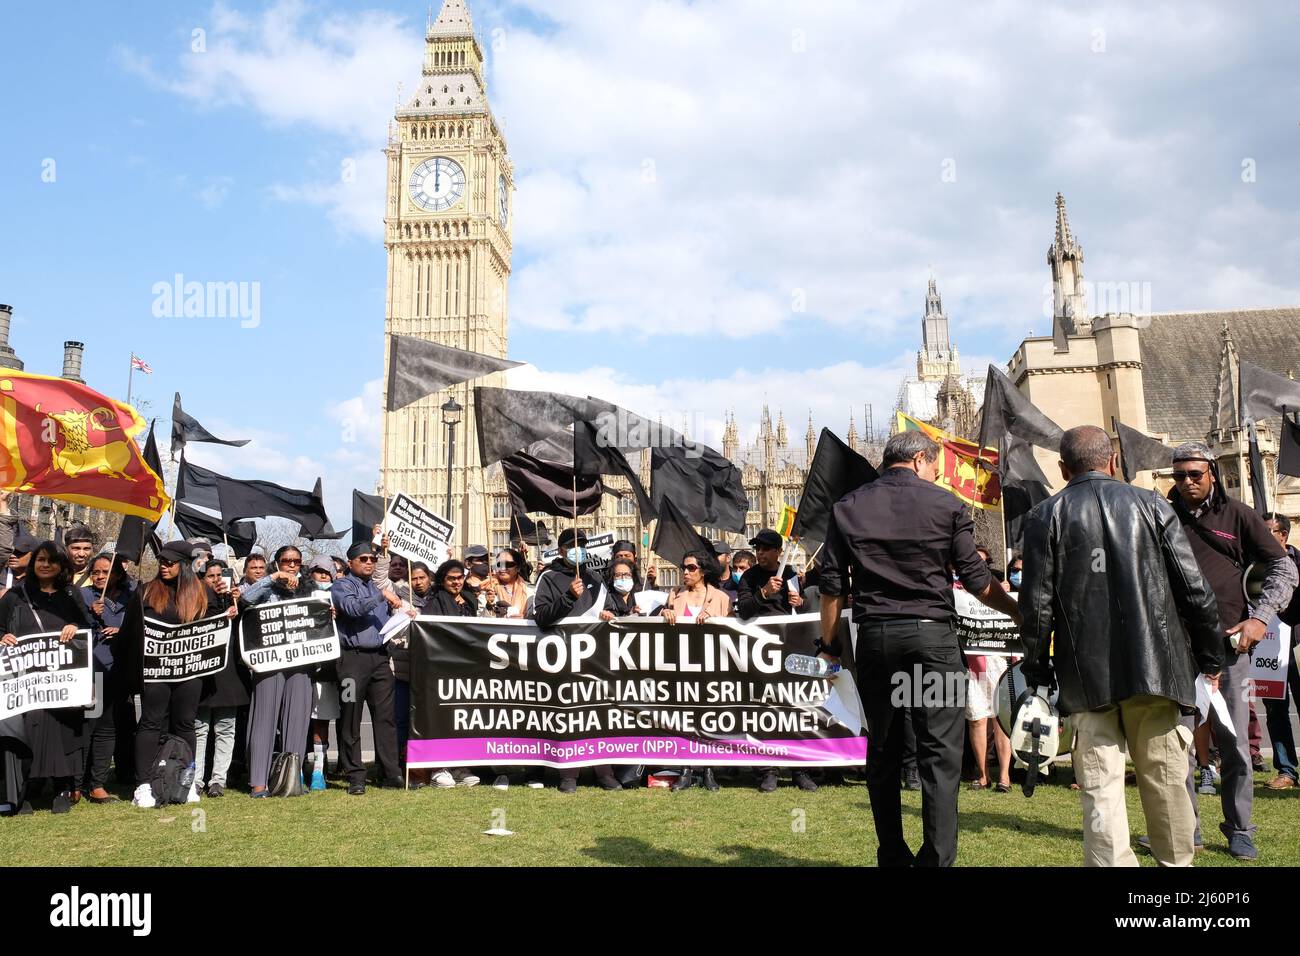 London, UK. The Sri Lankan community protest as economic crisis deepens in the south Asian nation, calling for the president to step down. Stock Photo